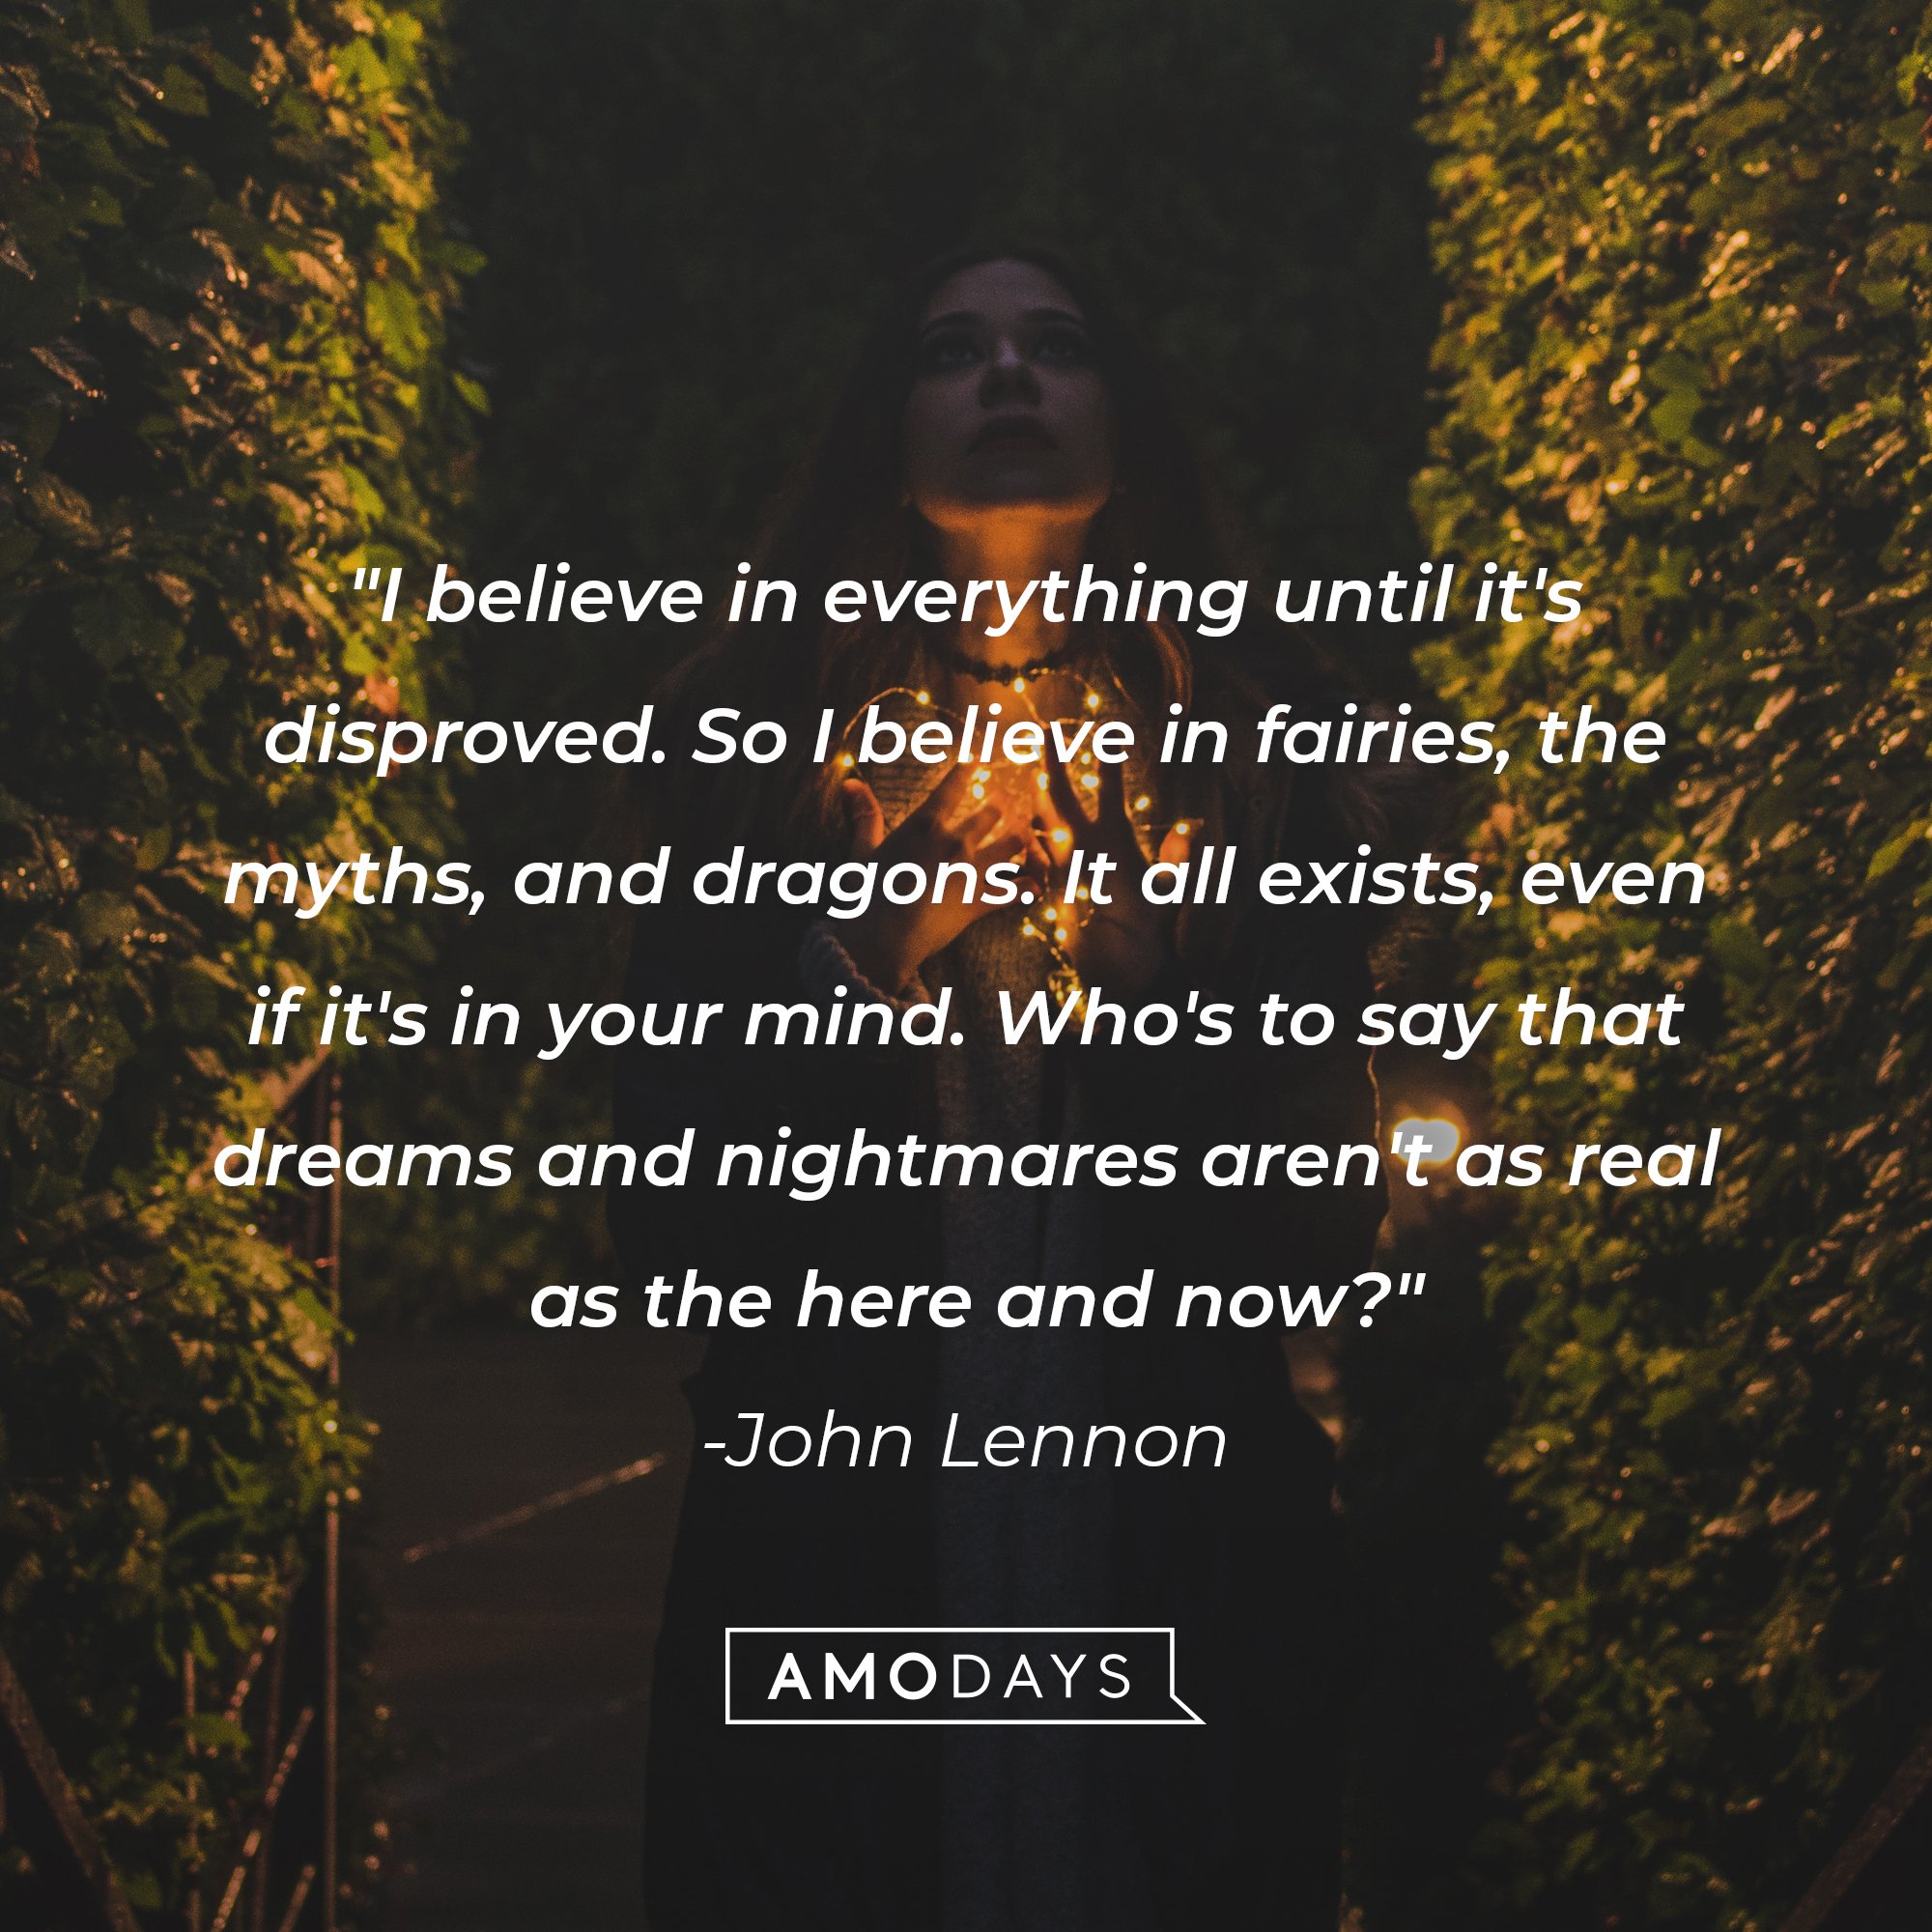 John Lennon's quote: "I believe in everything until it's disproved. So I believe in fairies, the myths, and dragons. It all exists, even if it's in your mind. Who's to say that dreams and nightmares aren't as real as the here and now?" | Image: Amo Days